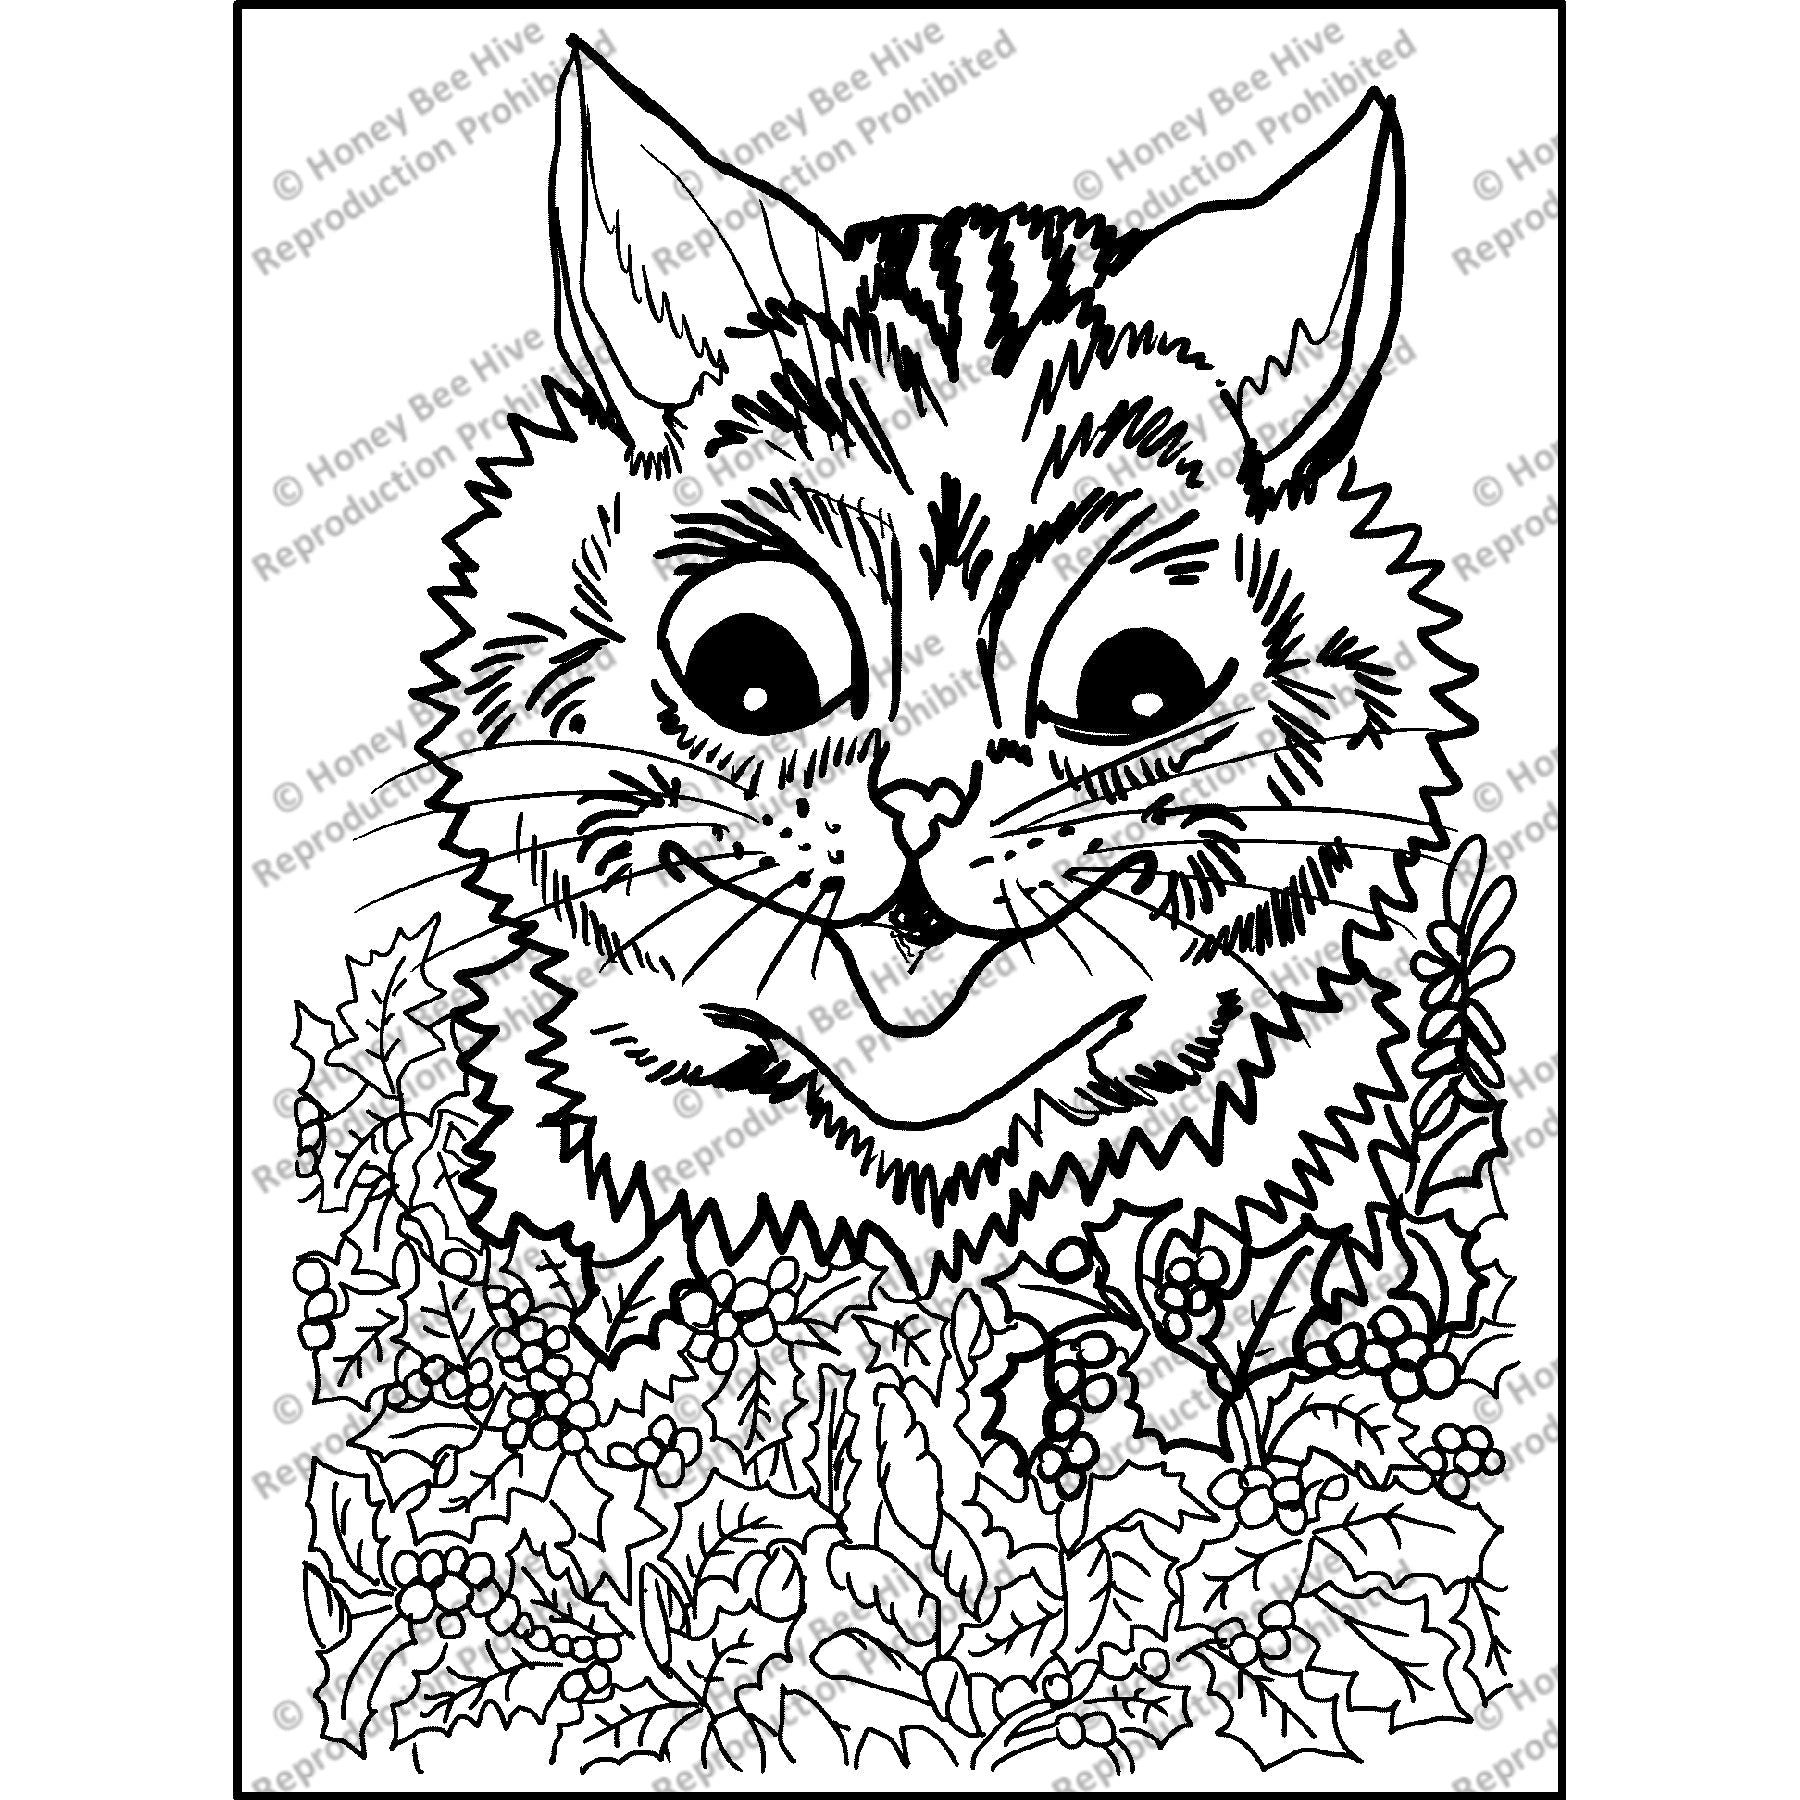 Holly Cat by Louis Wain, 1905, rug hooking pattern